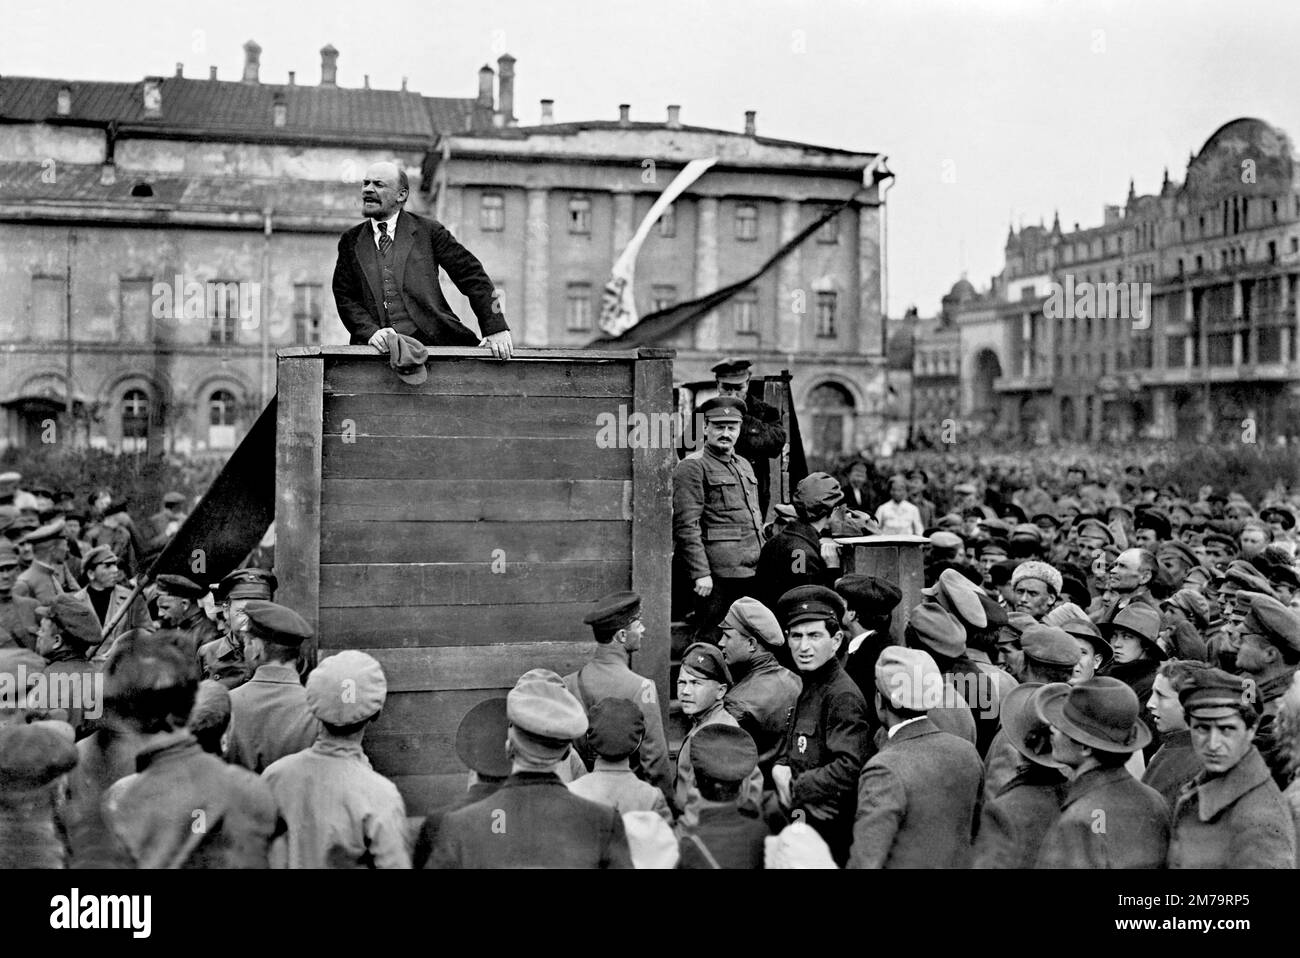 Vladimir Lenin, Leon Trotsky, Lev Kamenev motivate the troops to fight in the Soviet-Polish war. 1 May 1920, by Grigory Petrovich Goldstein Stock Photo